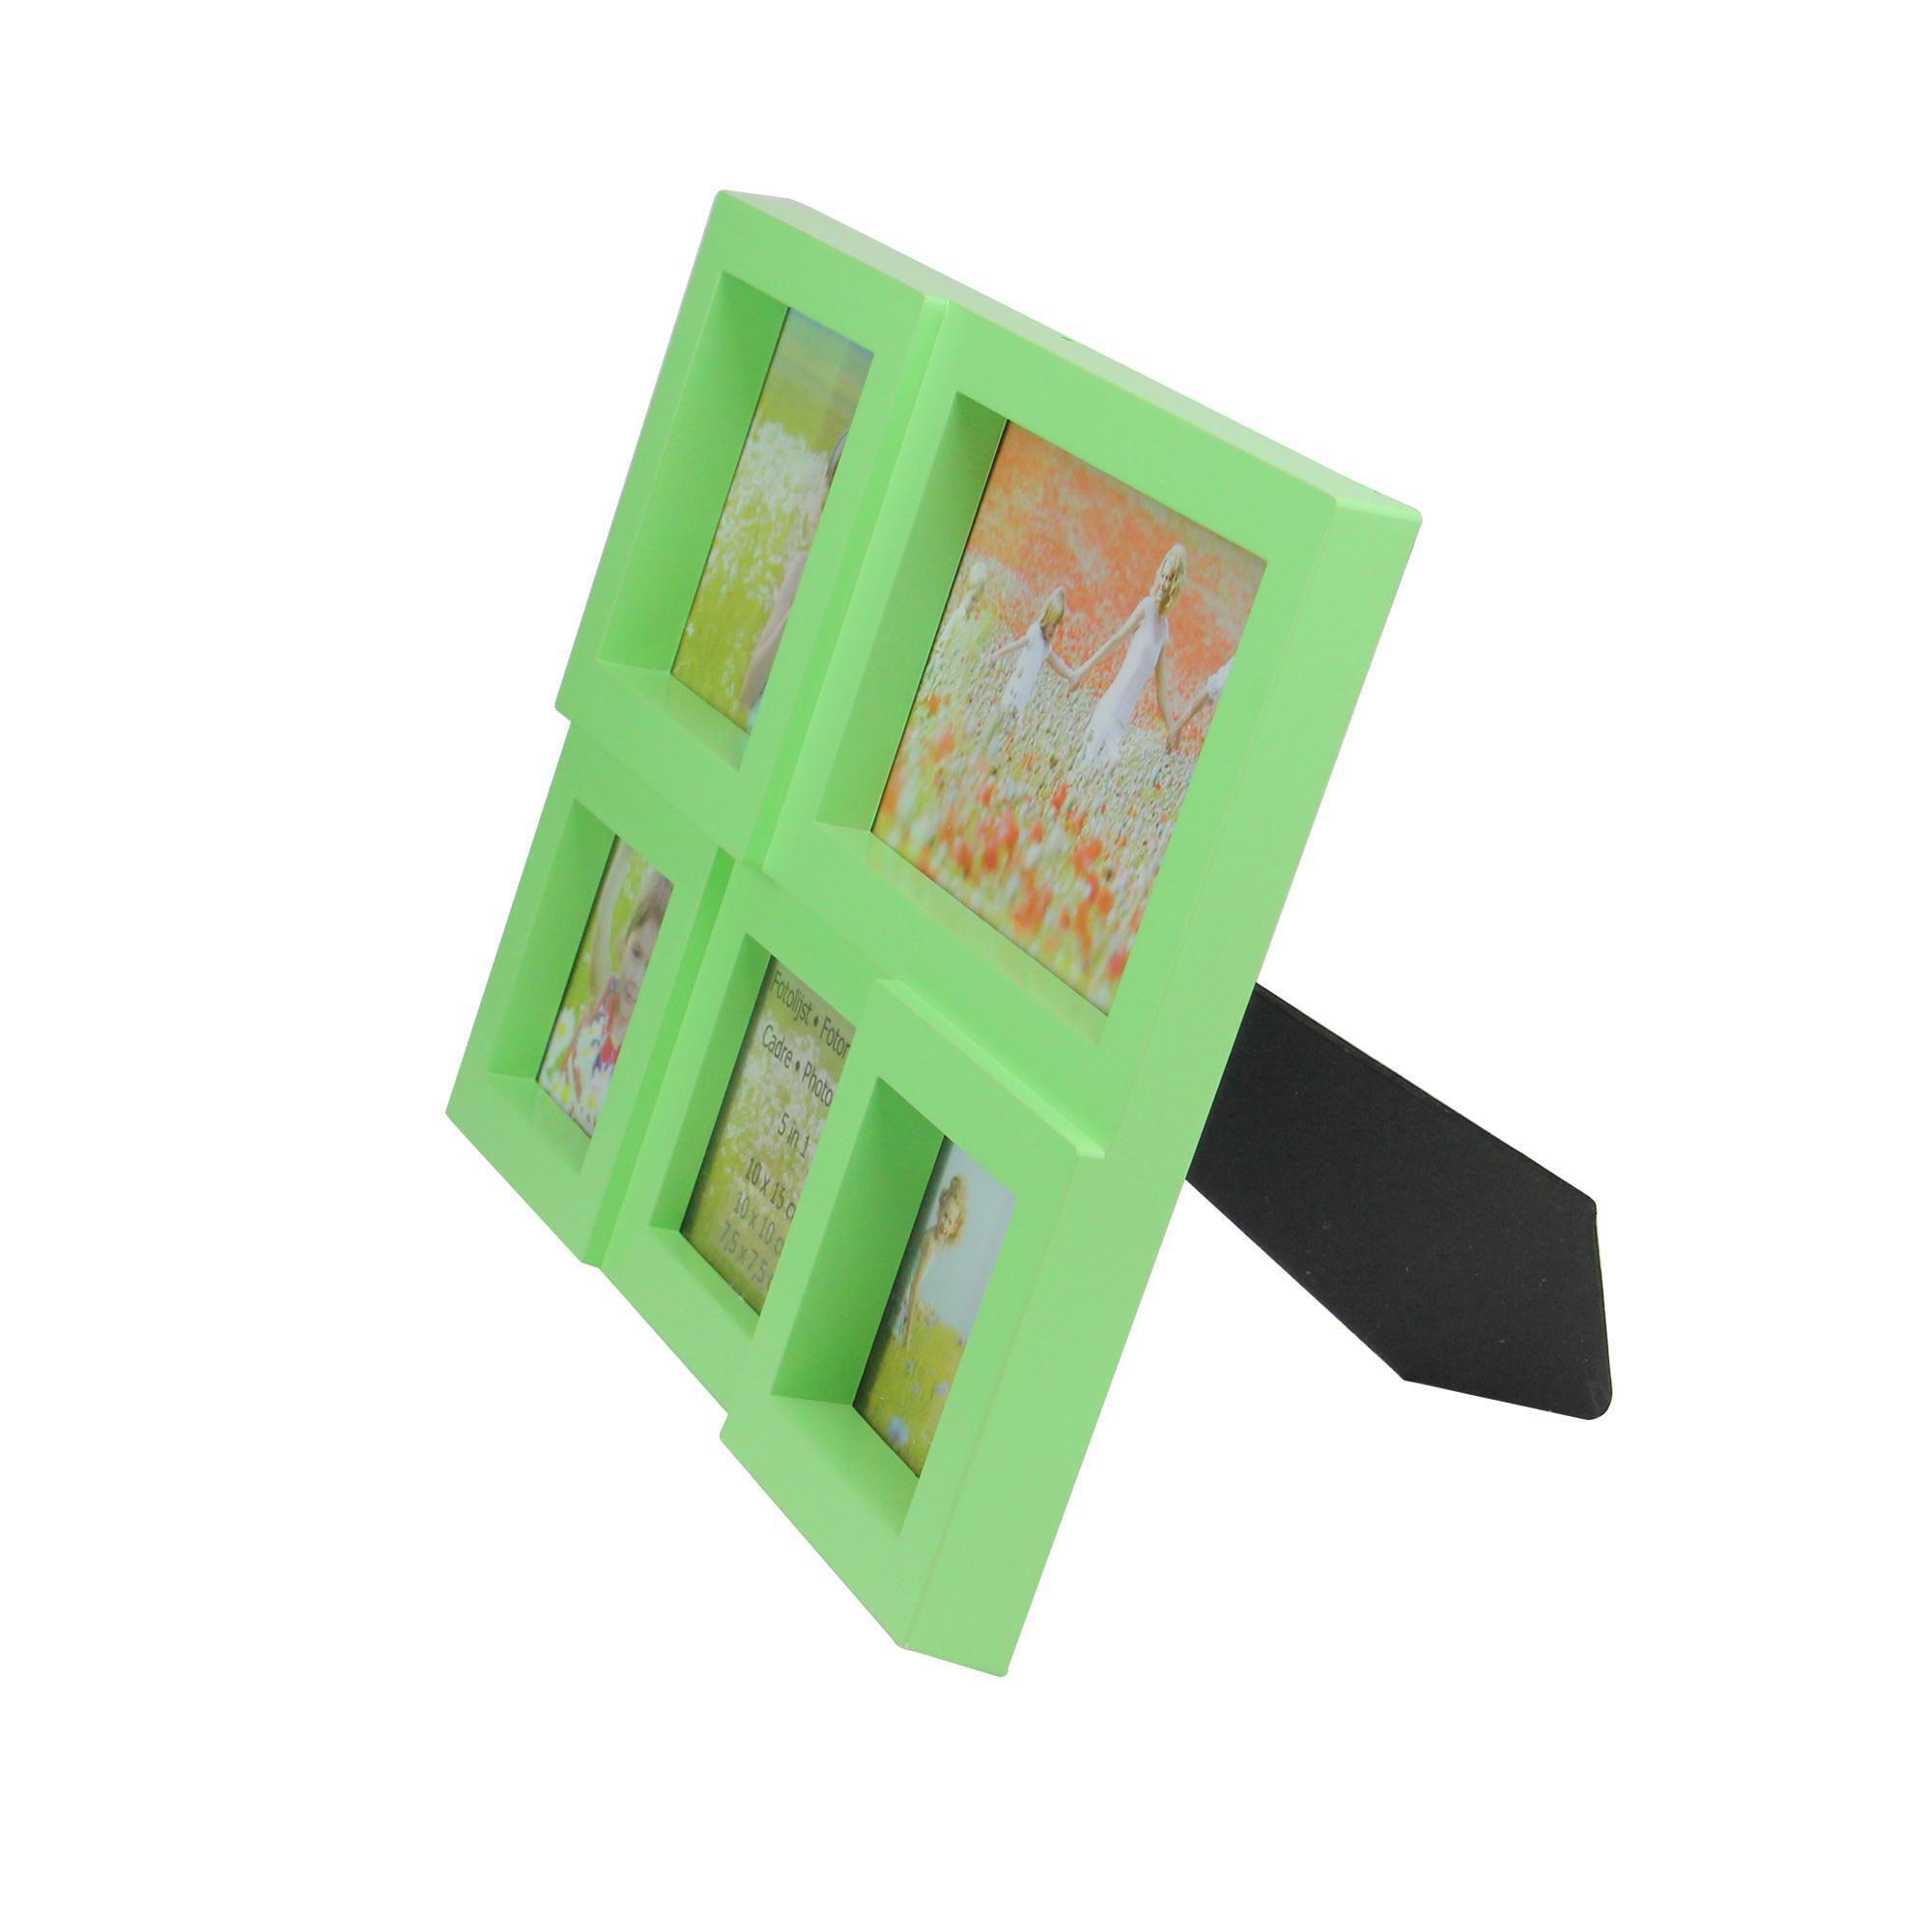 11.5" Green Multi-Sized Puzzled Collage Picture Frame alternate image